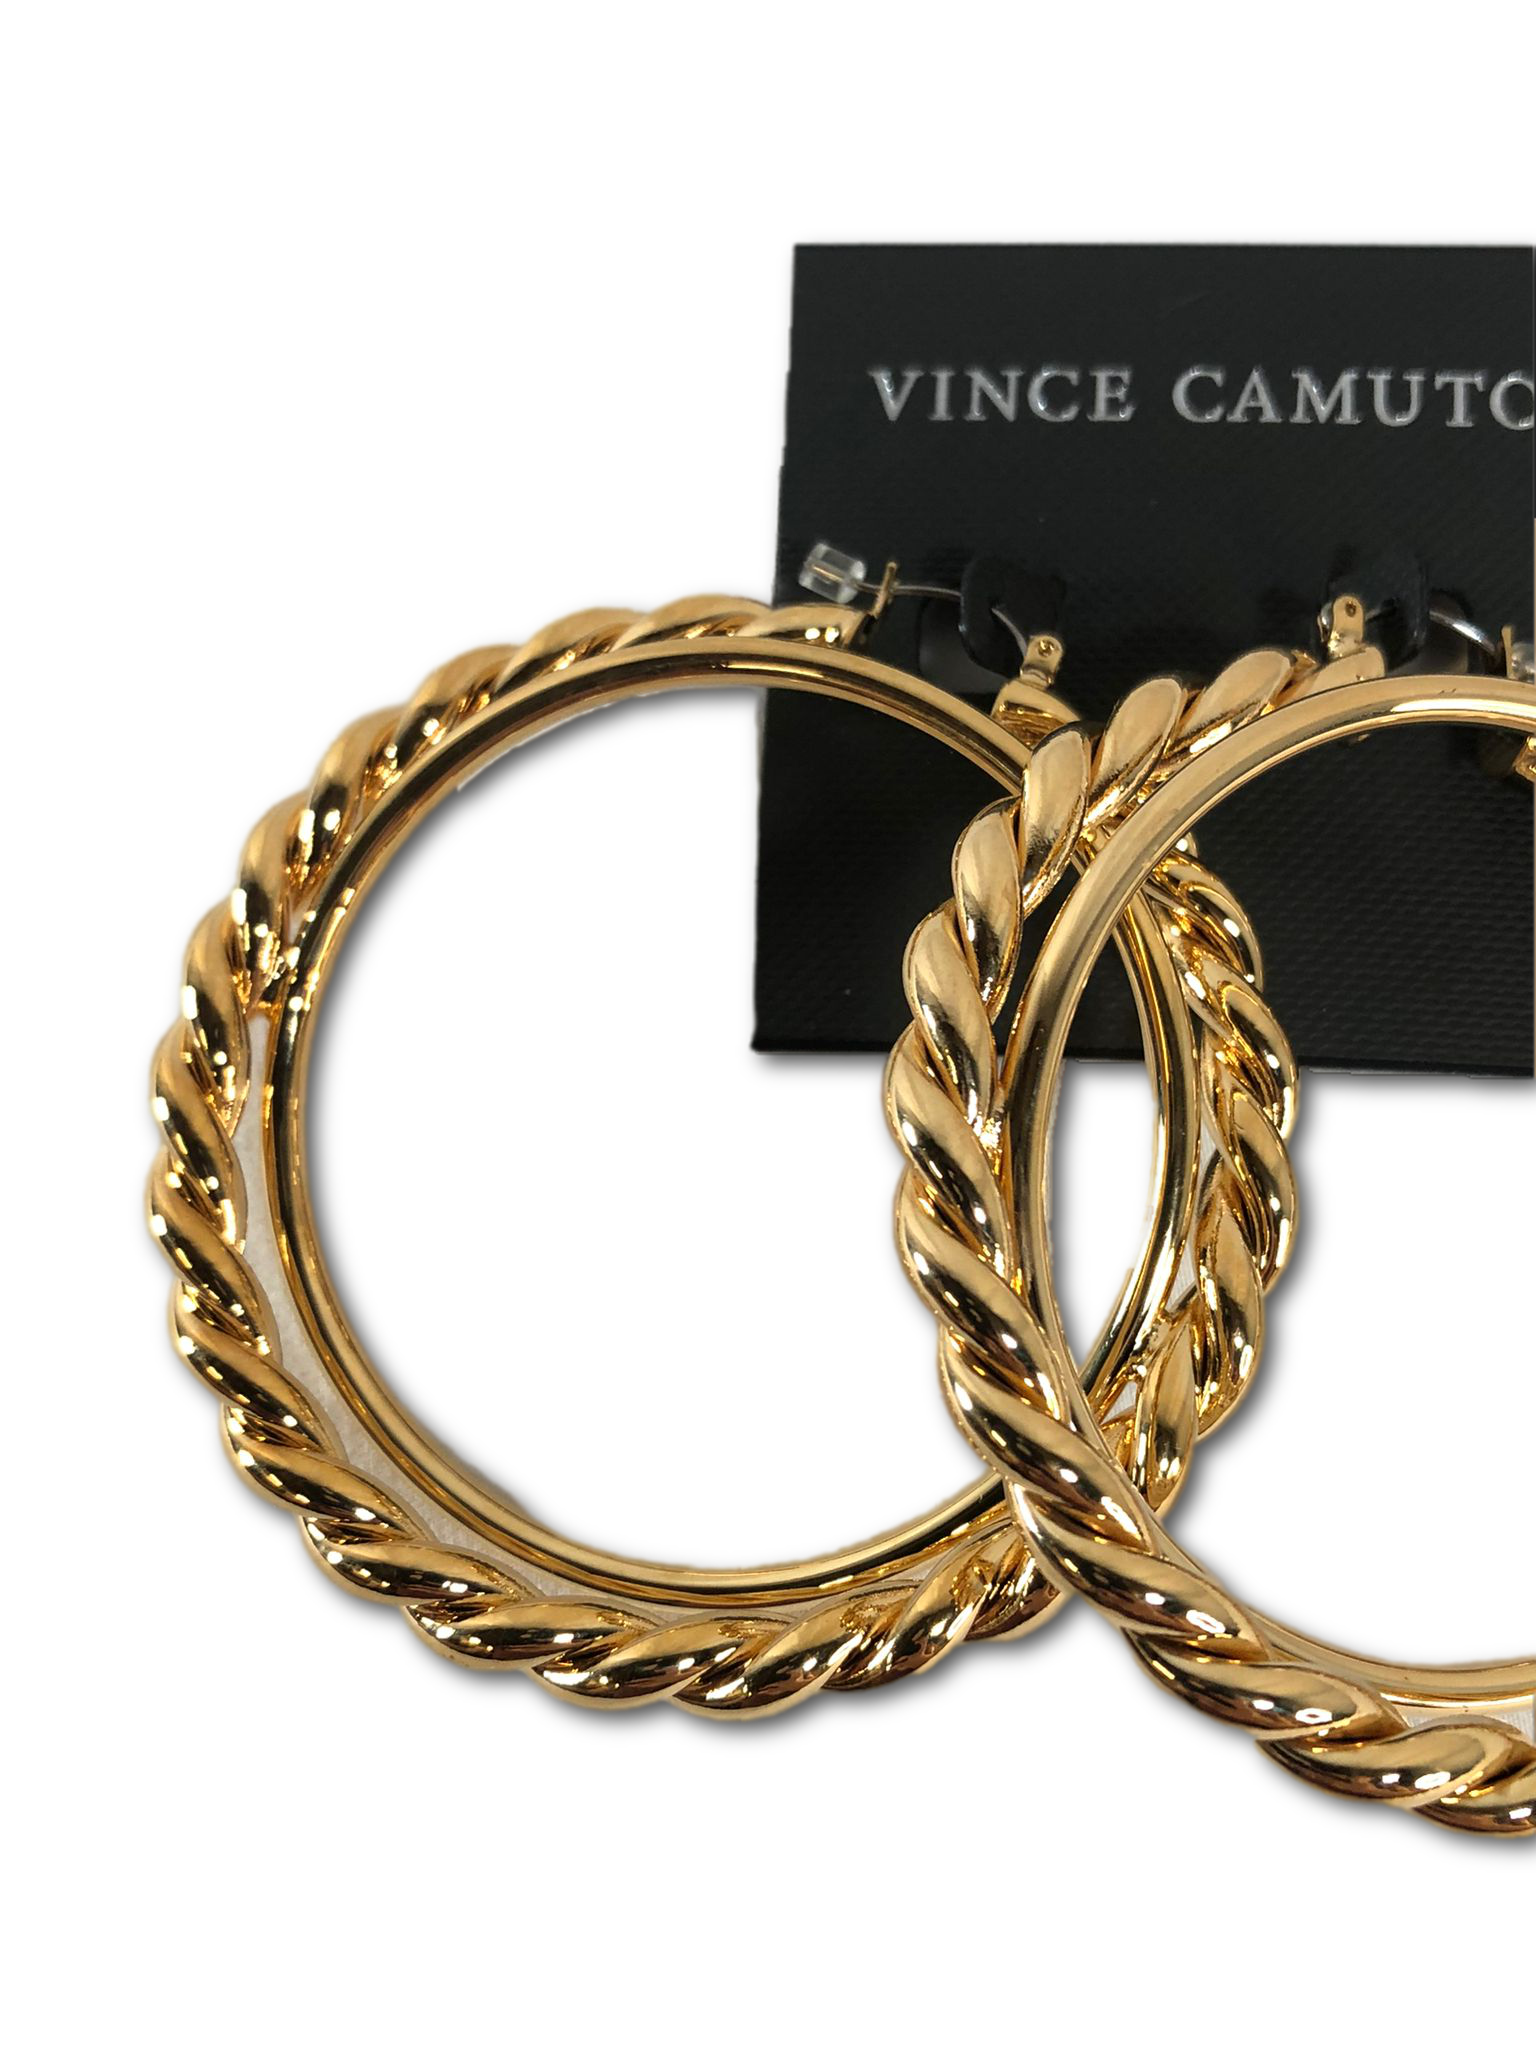 Vince Camuto 68mm Textured Interlocking Hoops, Gold, Small (VJ-404580)